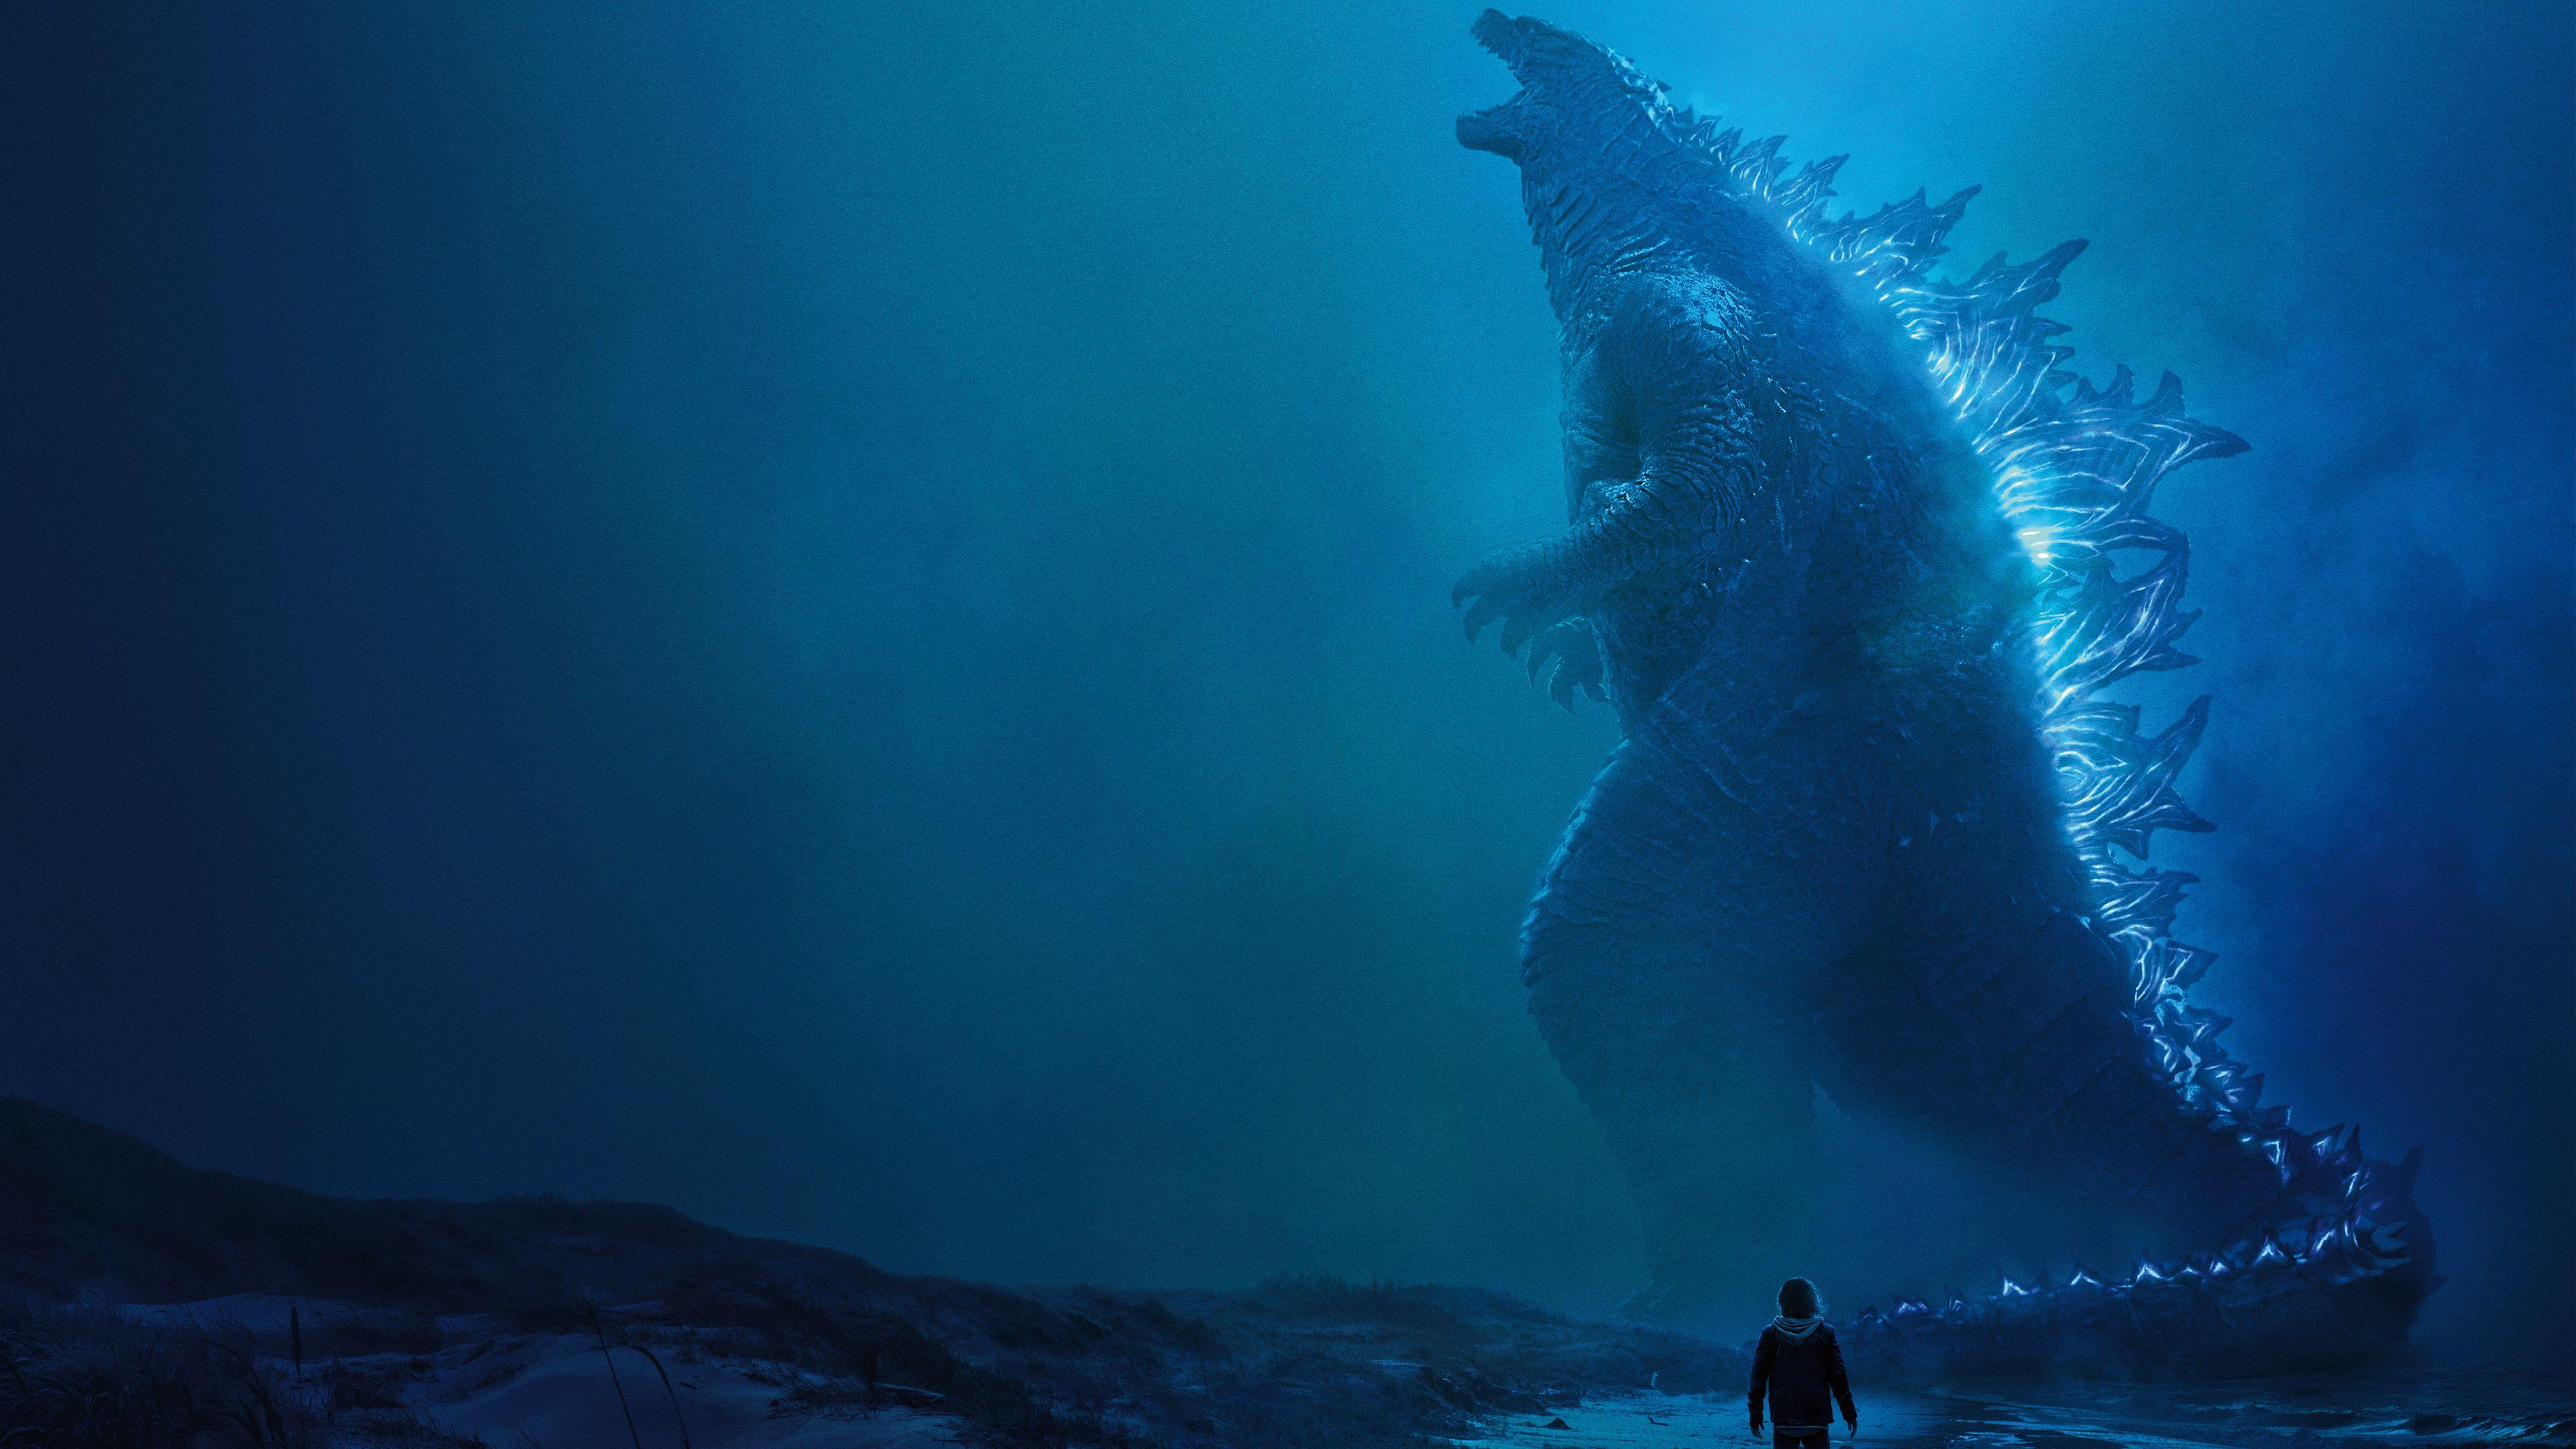 Godzilla King Of The Monsters 4k Poster Wallpaper, Movies Wallpaper, Millie Bobby Brown Wallpaper, Hd Wallpaper,. Godzilla Wallpaper, Movie Monsters, Godzilla